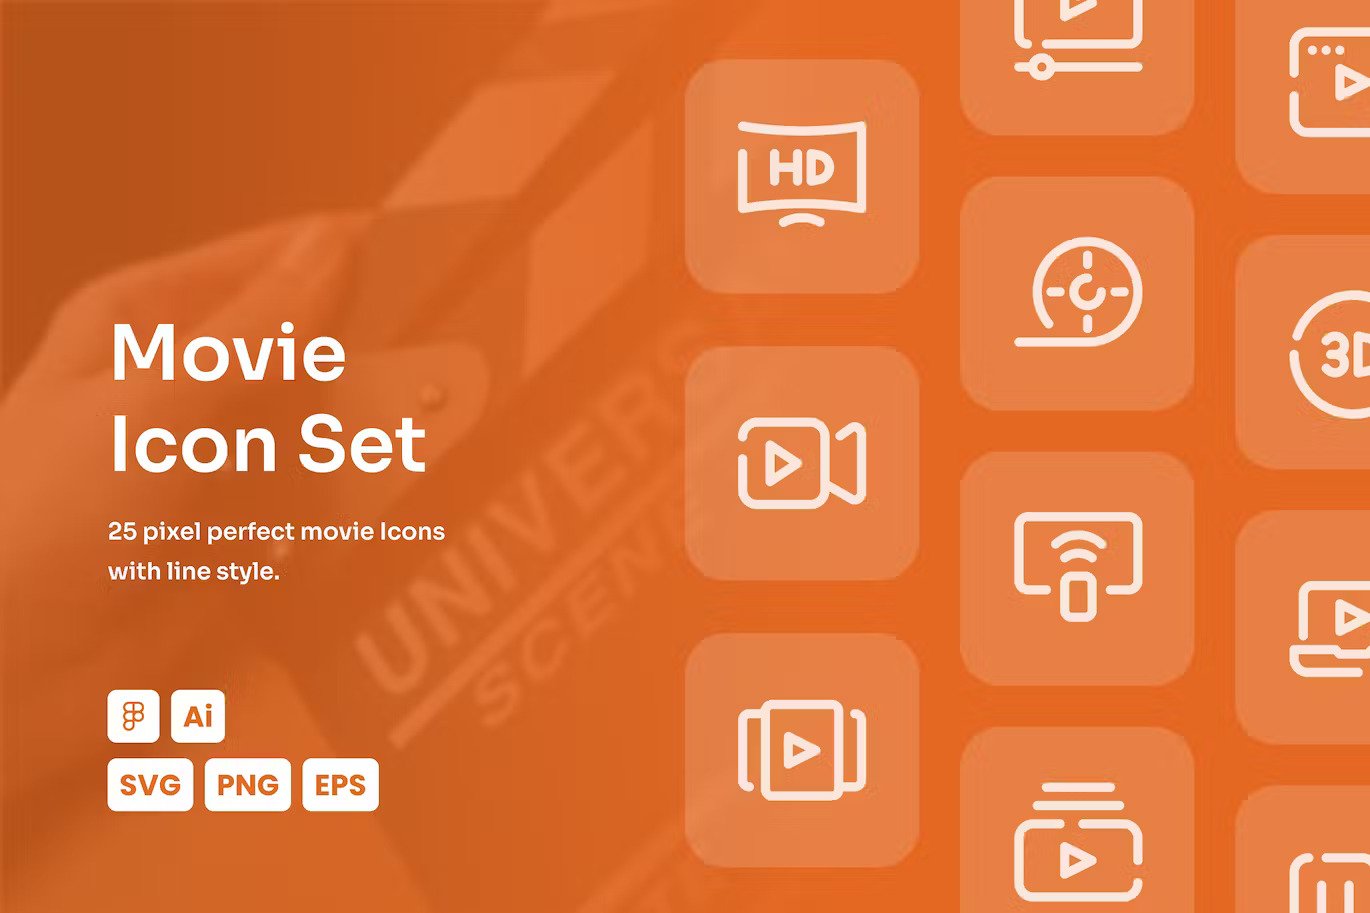 A movie dashed line icon set